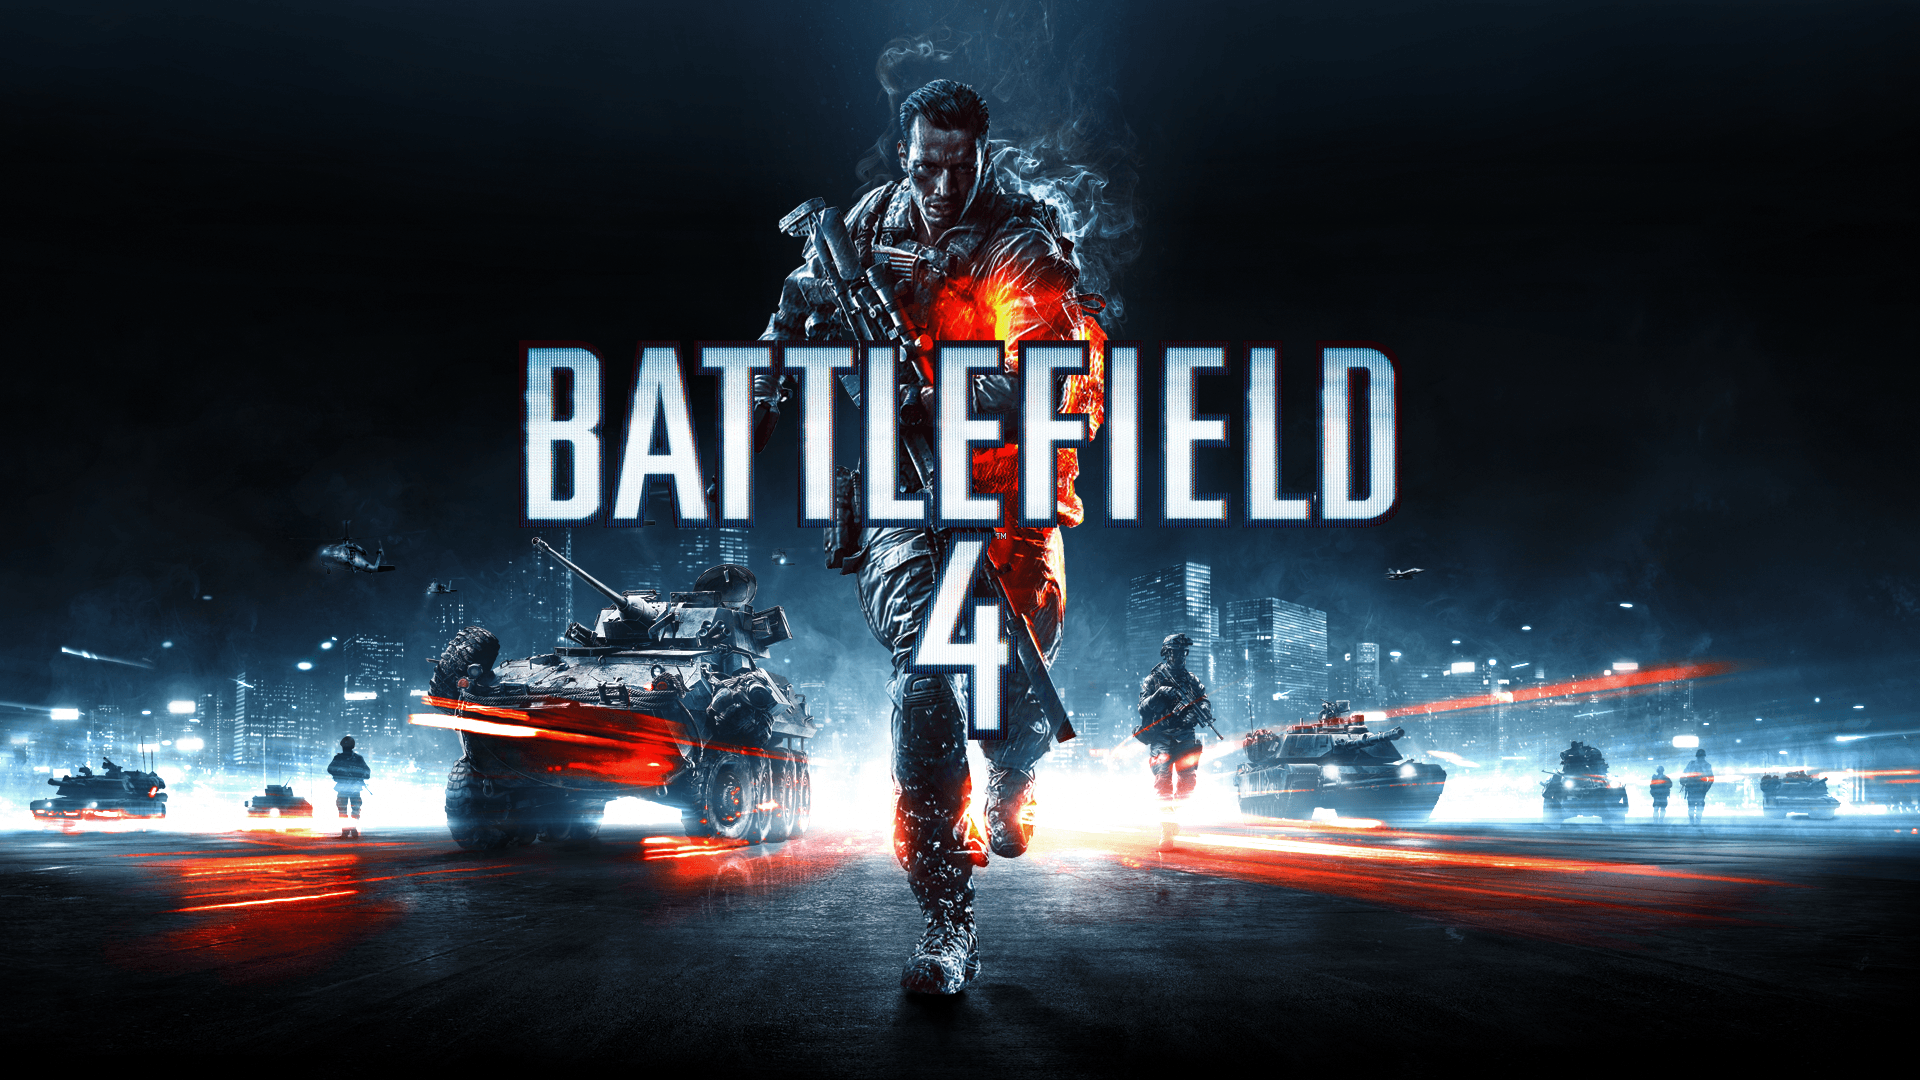 BATTLEFIELD 4 Xbox One Full Version Free Download